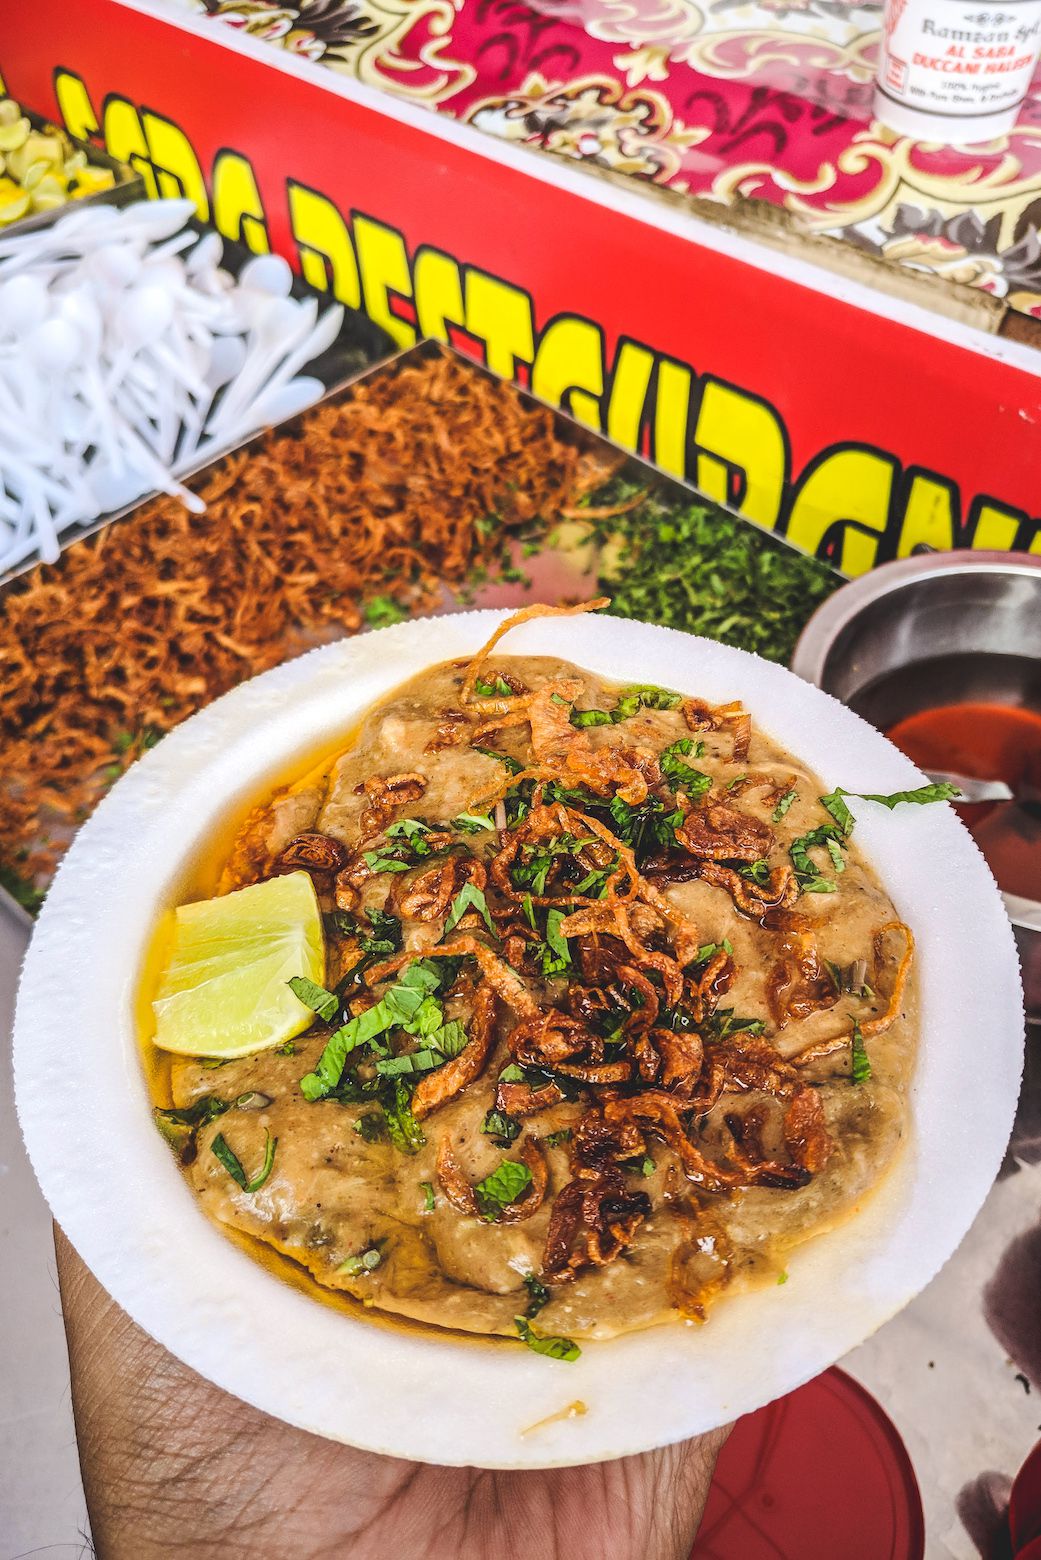 A bowl of haleem topped with fried onions, herbs, and a lemon wedge.